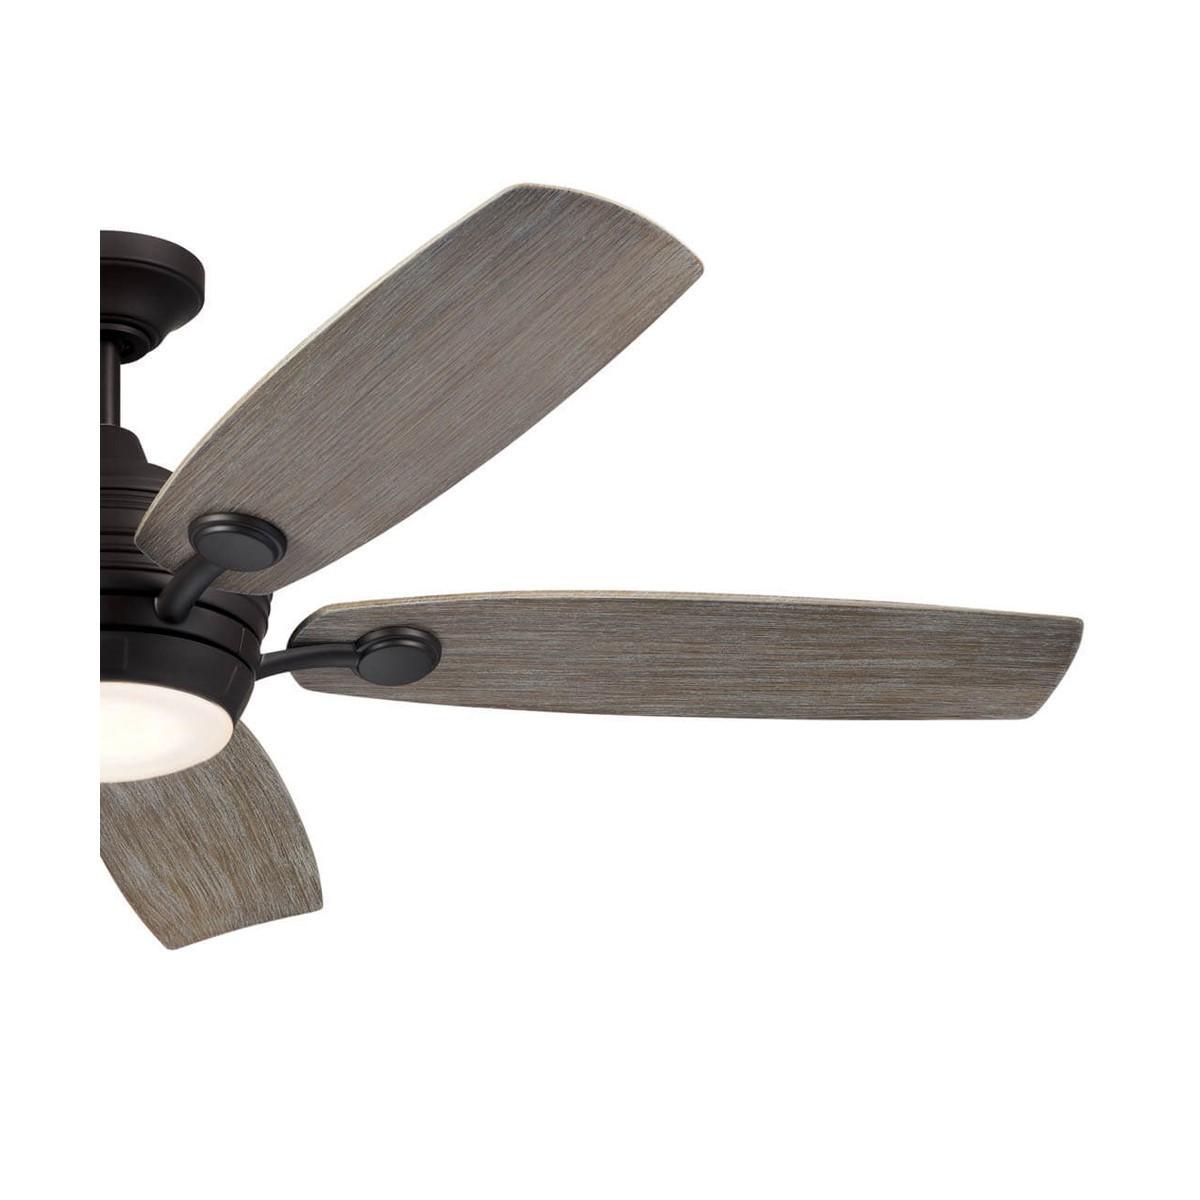 Tranquil 56 Inch Outdoor Ceiling Fan With Light And Remote, Marine Grade - Bees Lighting